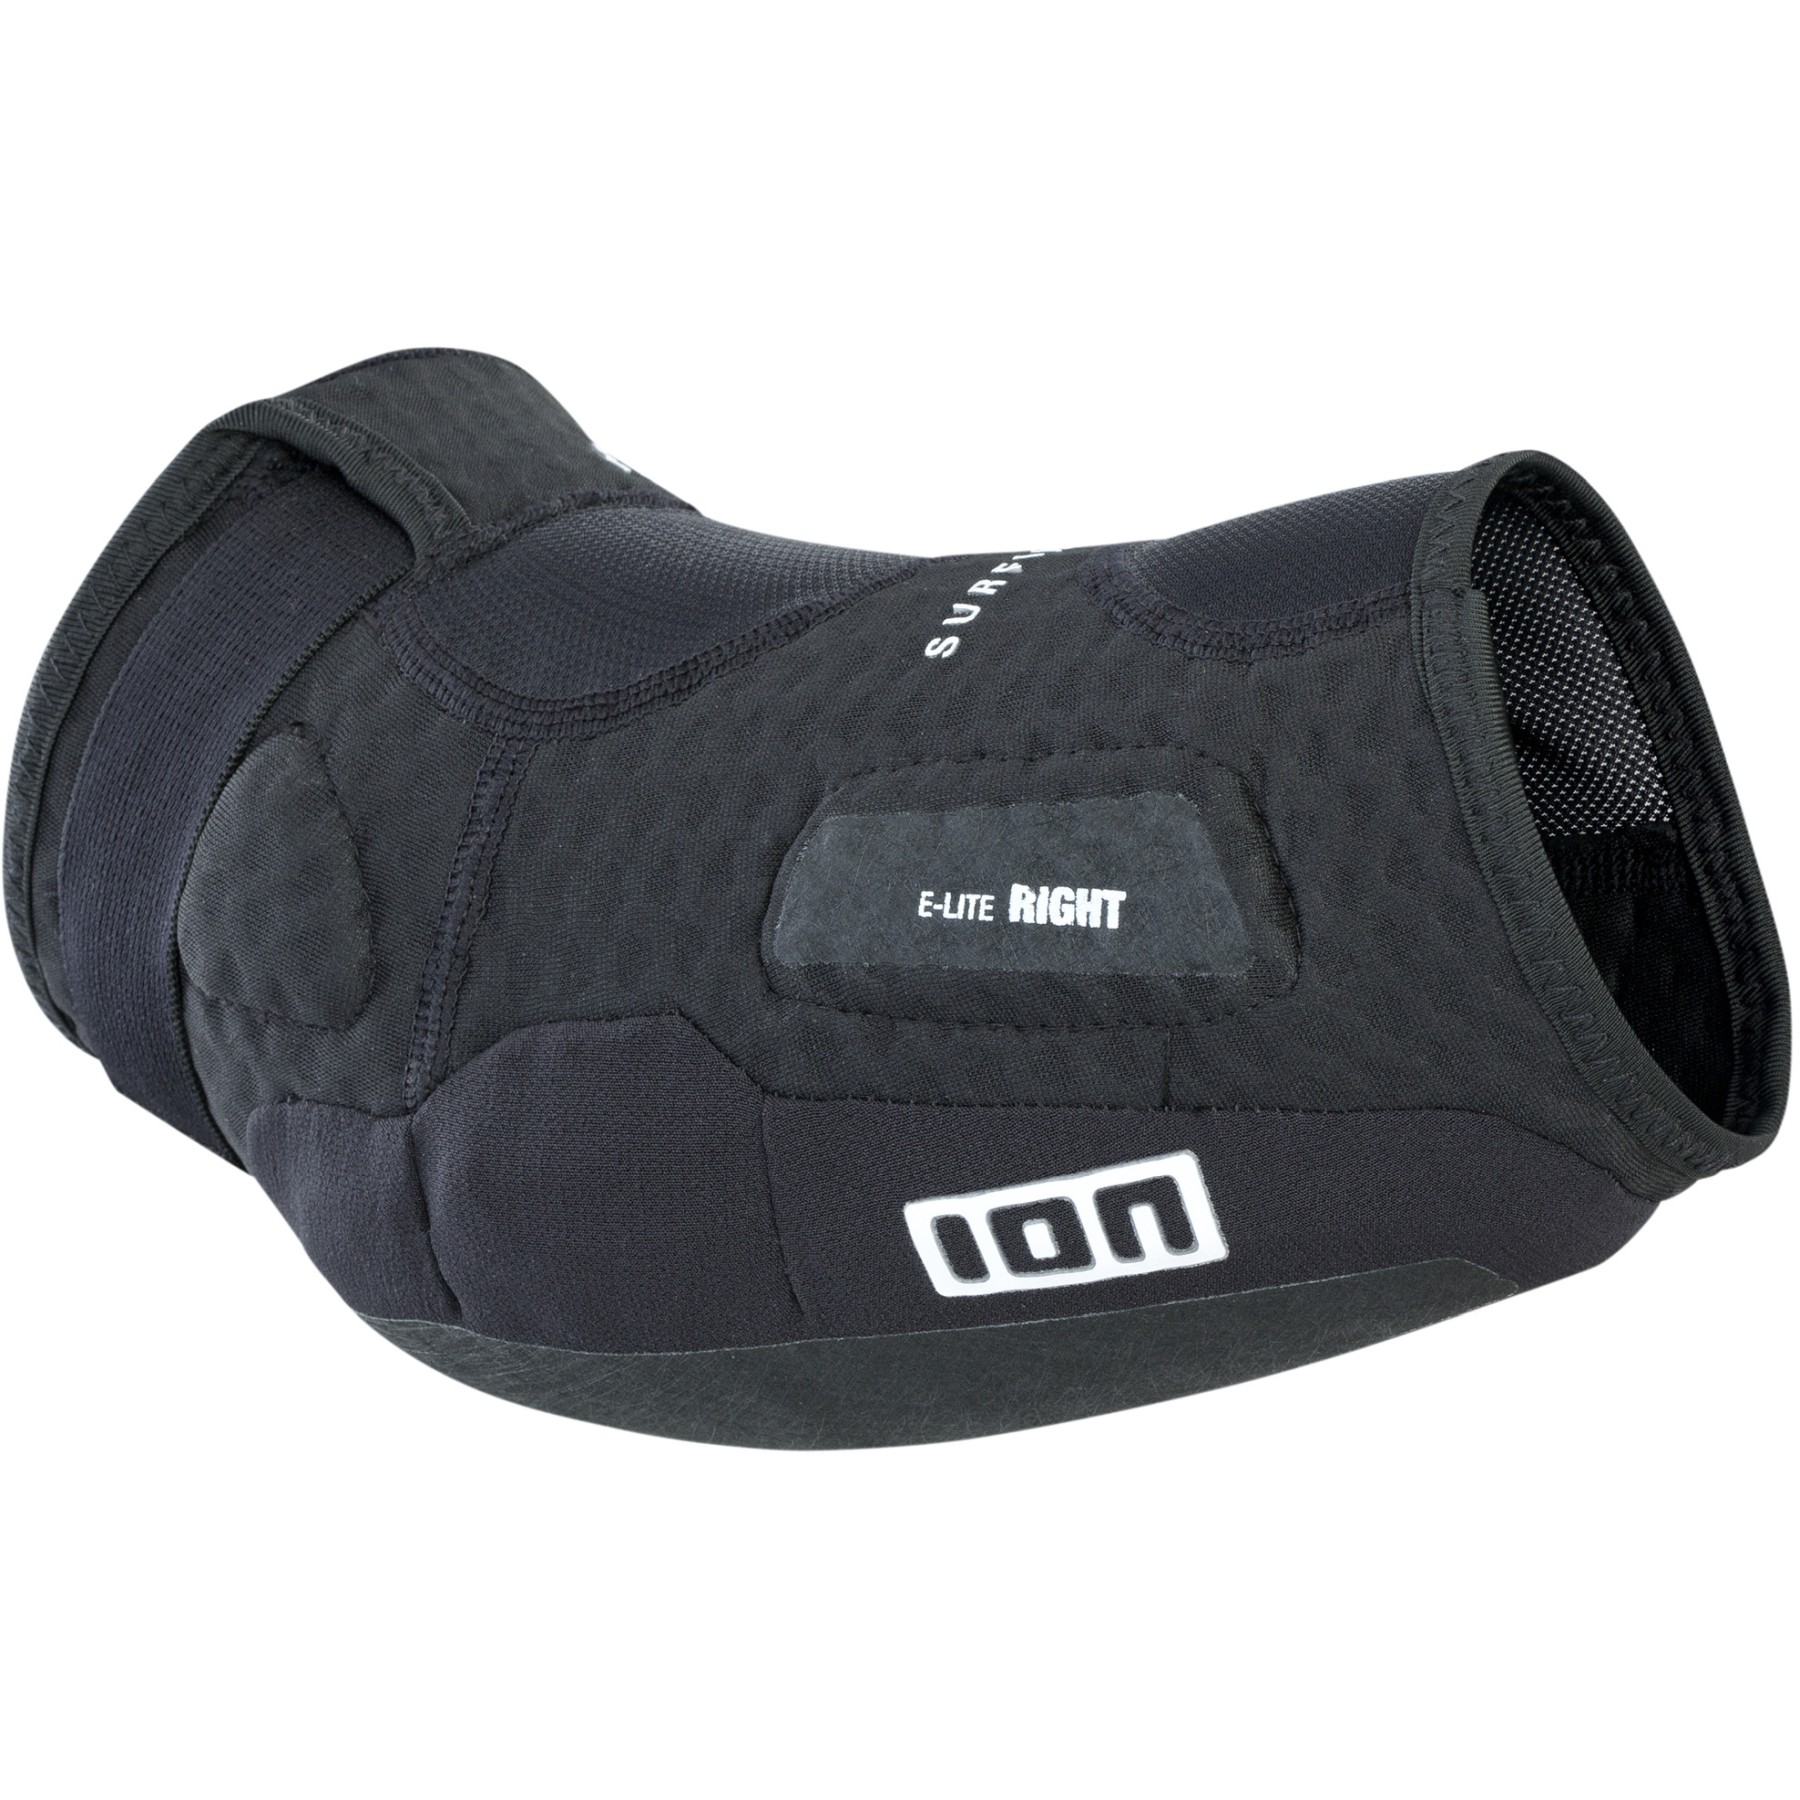 Image of ION Bike Protection E-Lite Elbow Guards - Black